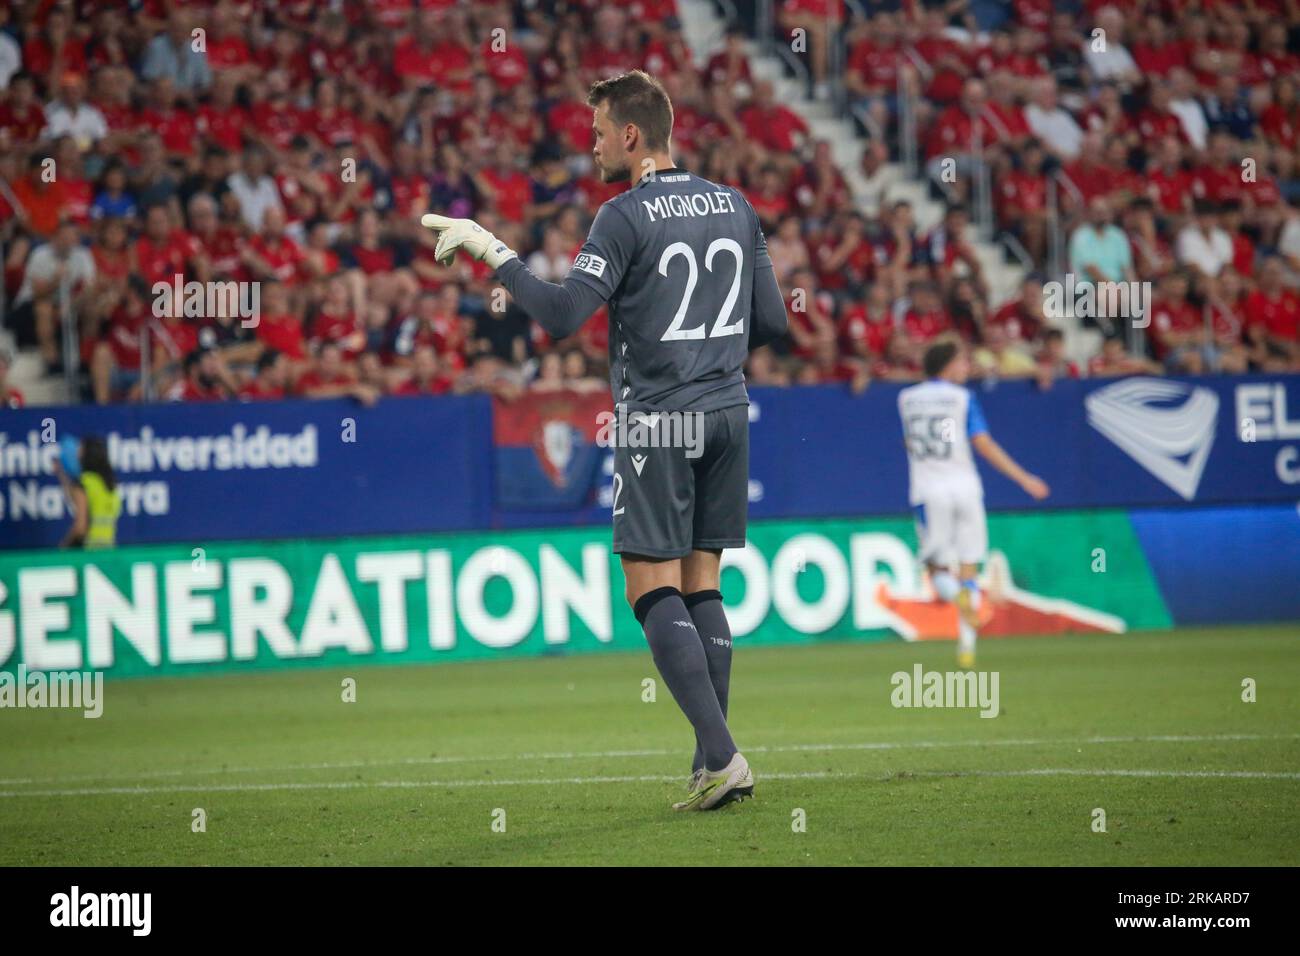 Pamplona, Spain, 24th August, 2023: Club Brugge's goalkeeper, Simon Mignolet (22) scolds during the first leg match of the previous round of the UEFA Europa Conference League 2023-24 between CA Osasuna and Club Brugge at the Estadio from El Sadar, in Pamplona, on August 24, 2023. Credit: Alberto Brevers / Alamy Live News. Stock Photo